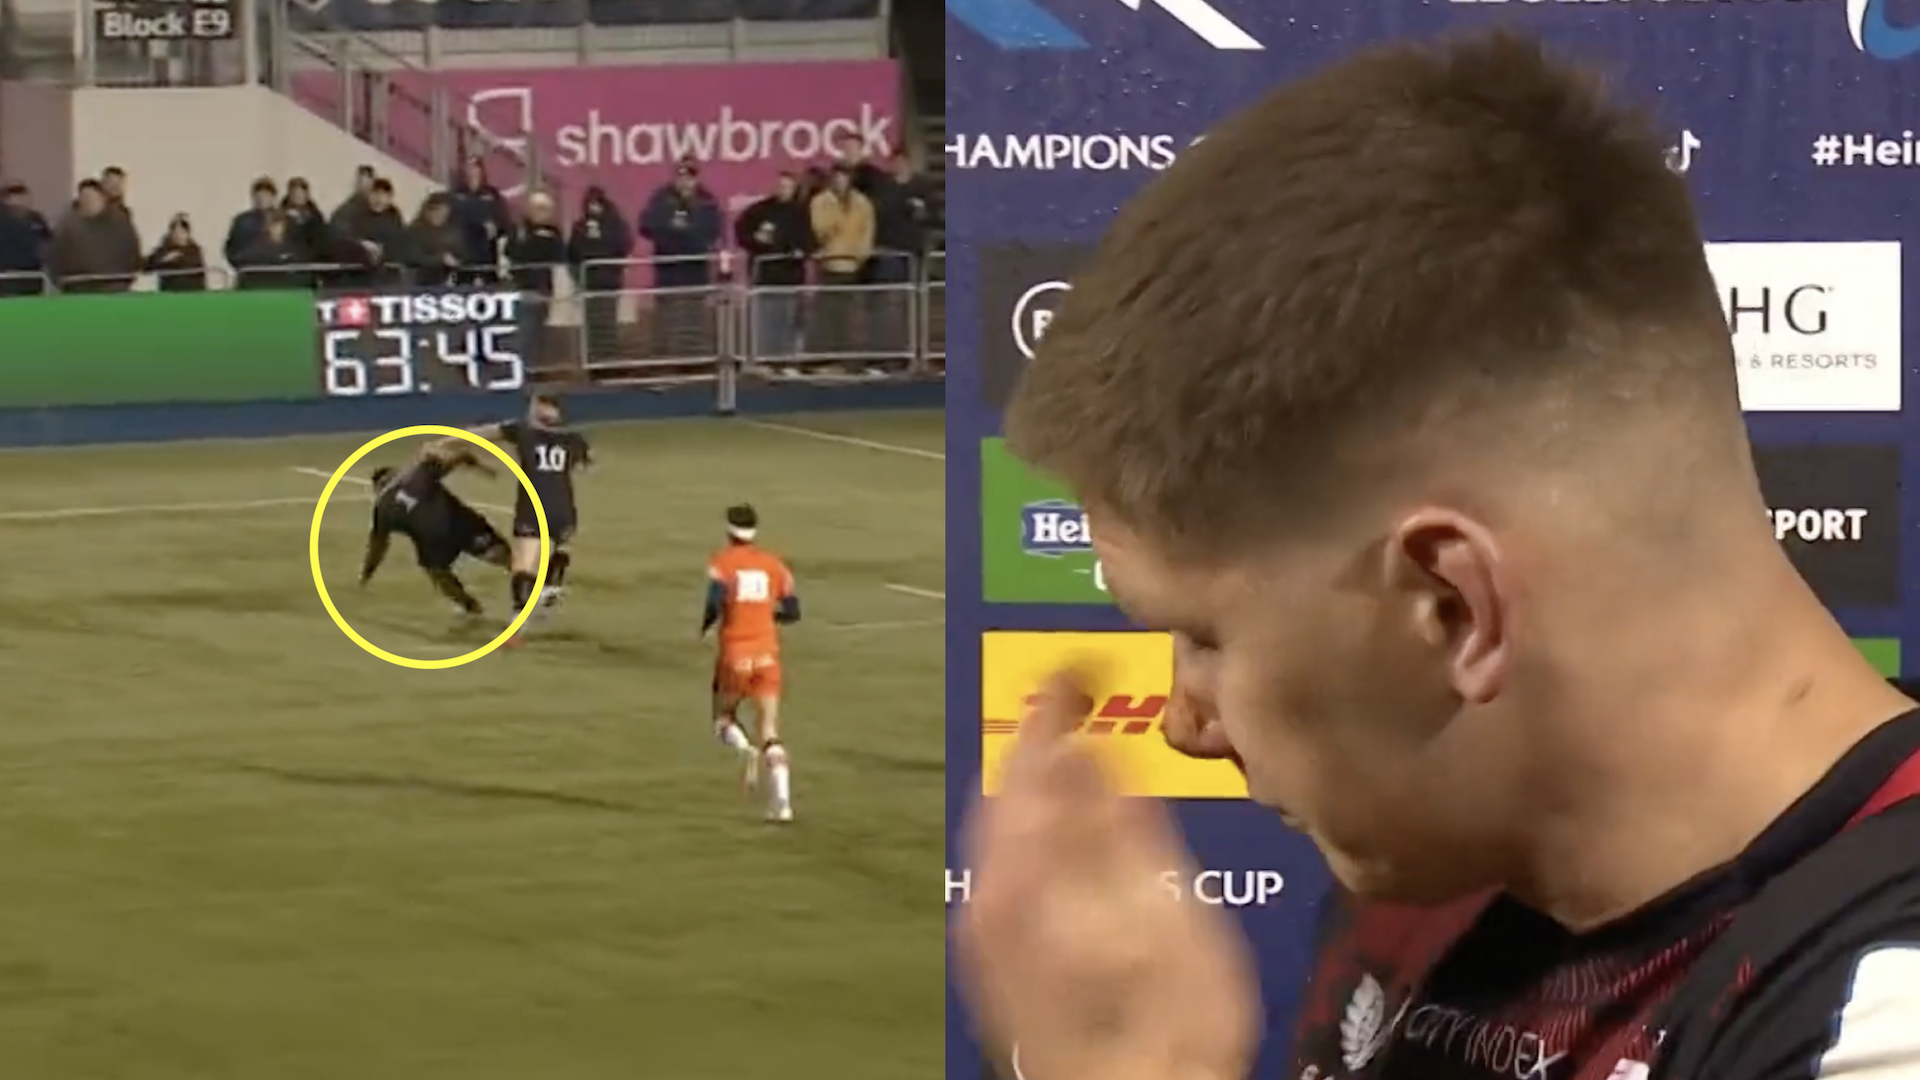 Owen Farrell attacks his own teammate moments before almost having nose broken